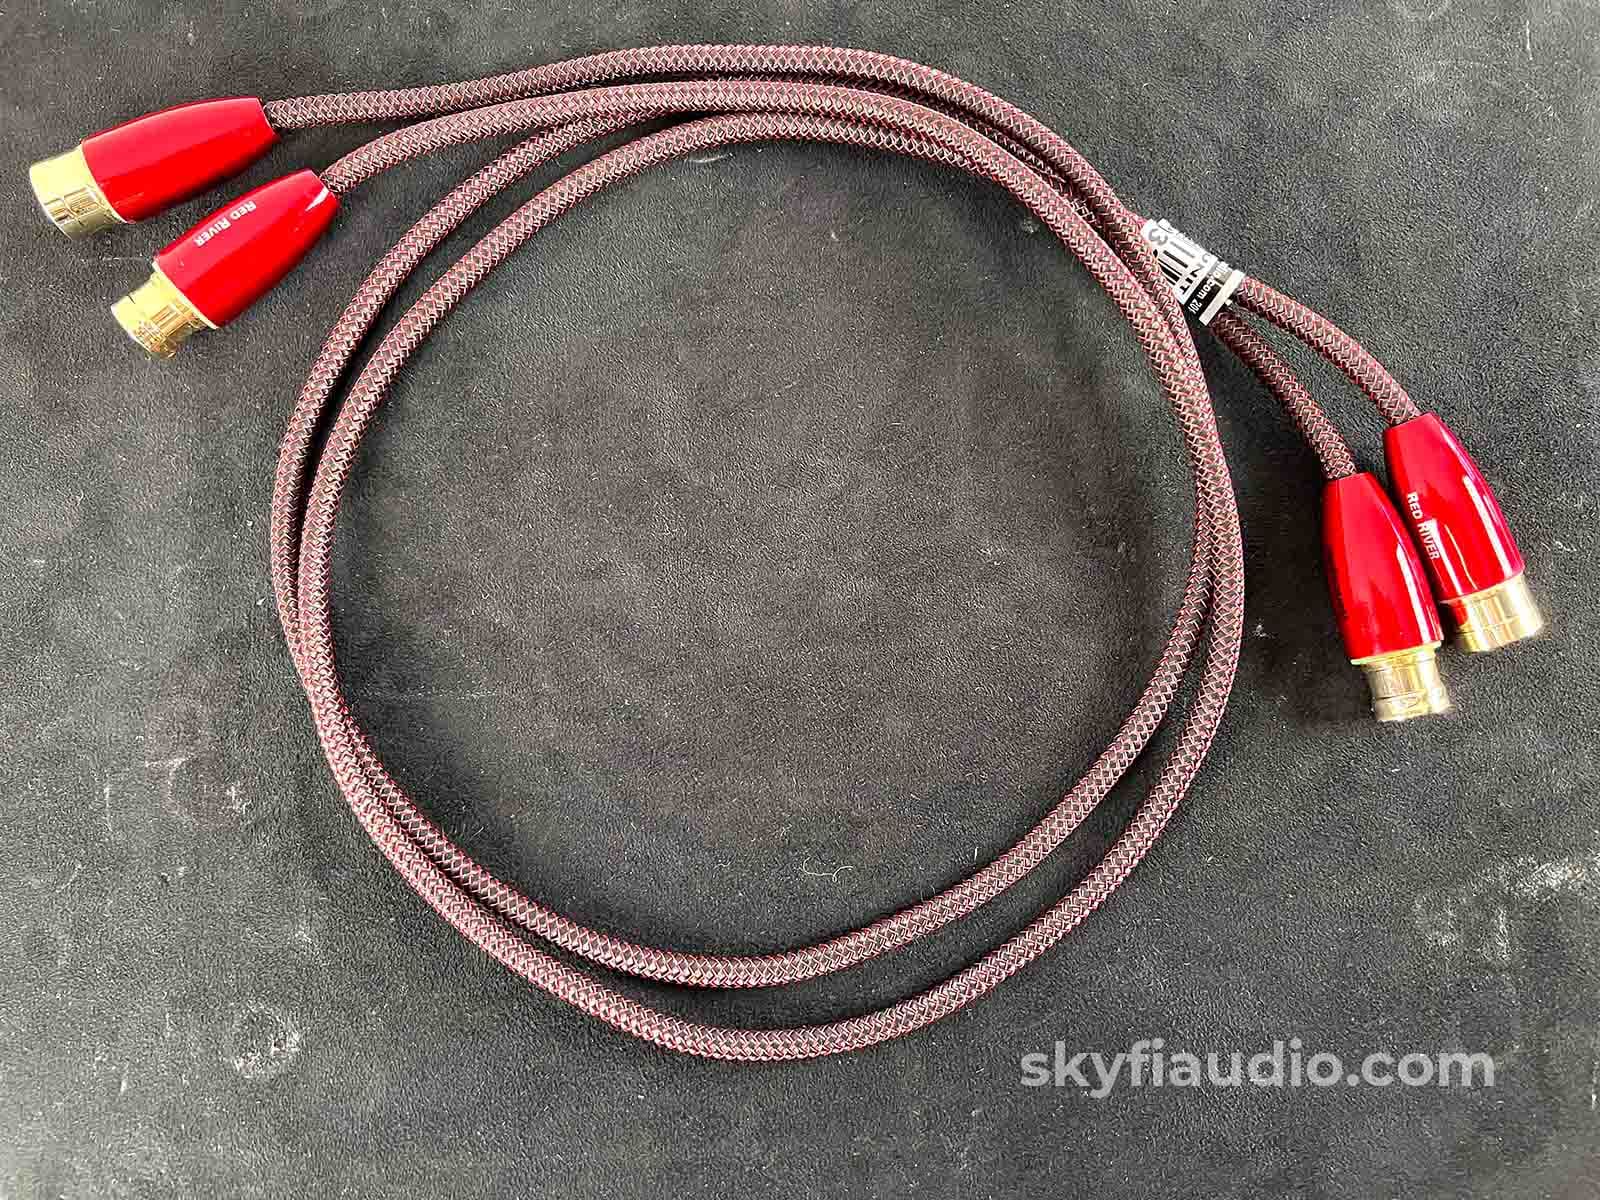 Audioquest Red River Xlr Interconnects (Pair) - 1M Cables